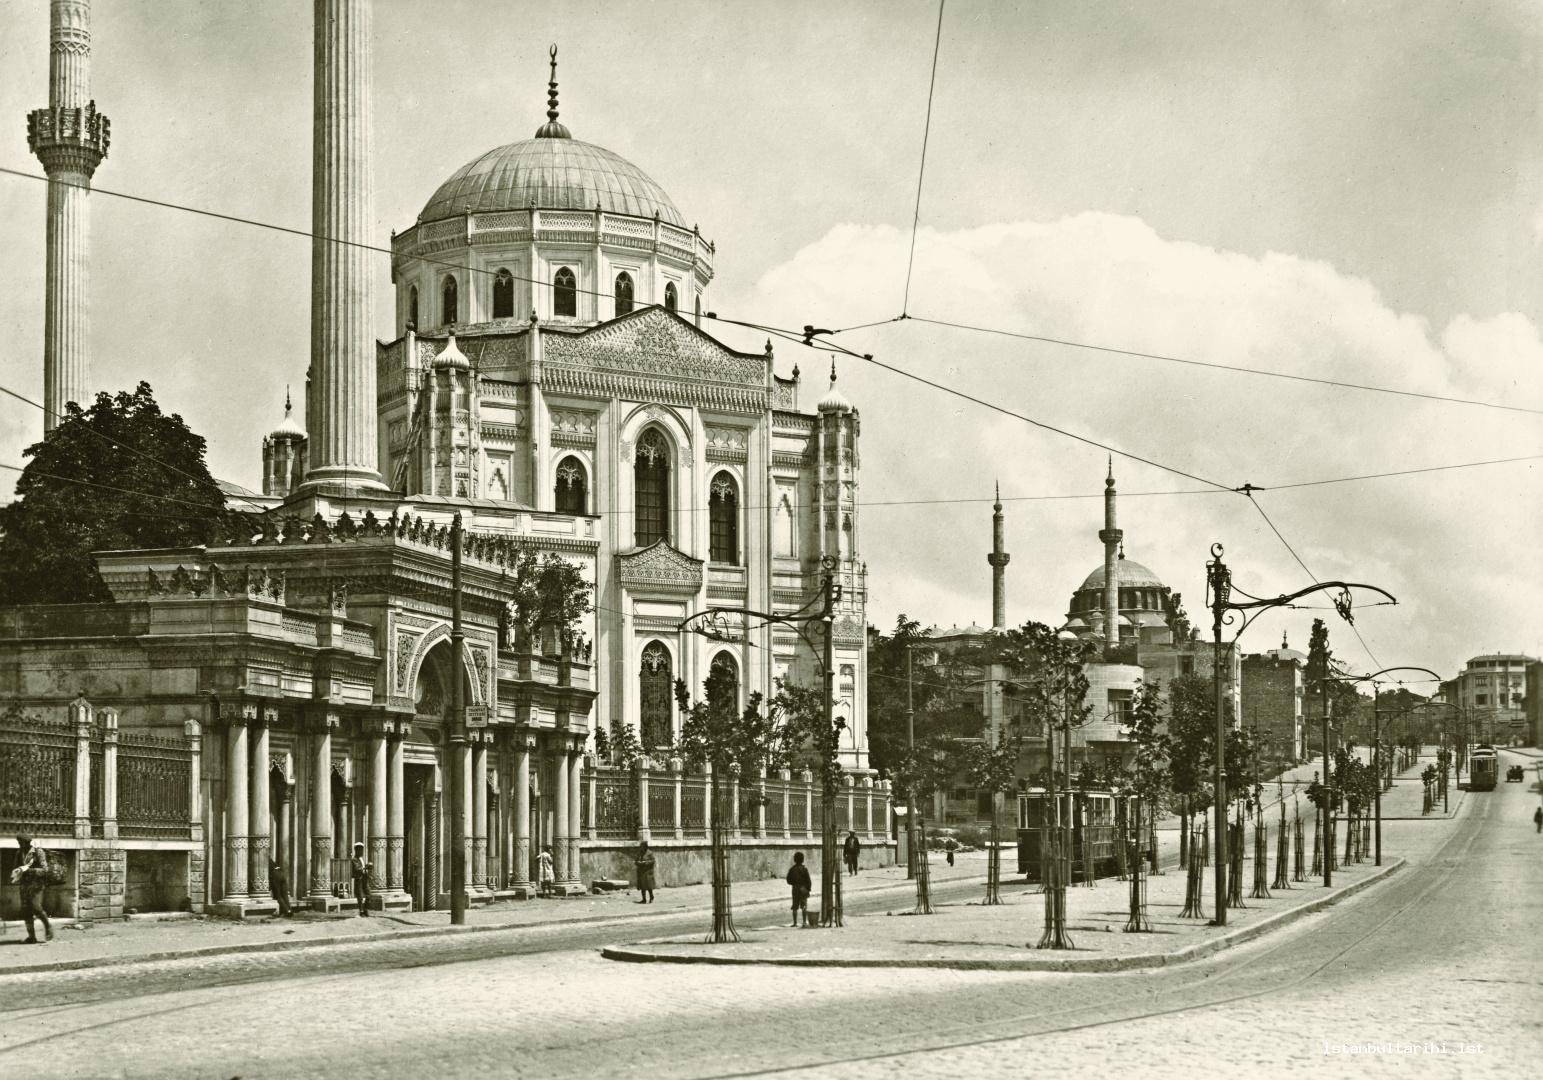 6- Aksaray. Pertevniyal Valide Sultan Mosque is on the front and Laleli (Sultan Mustafa III) Mosque is in the back.